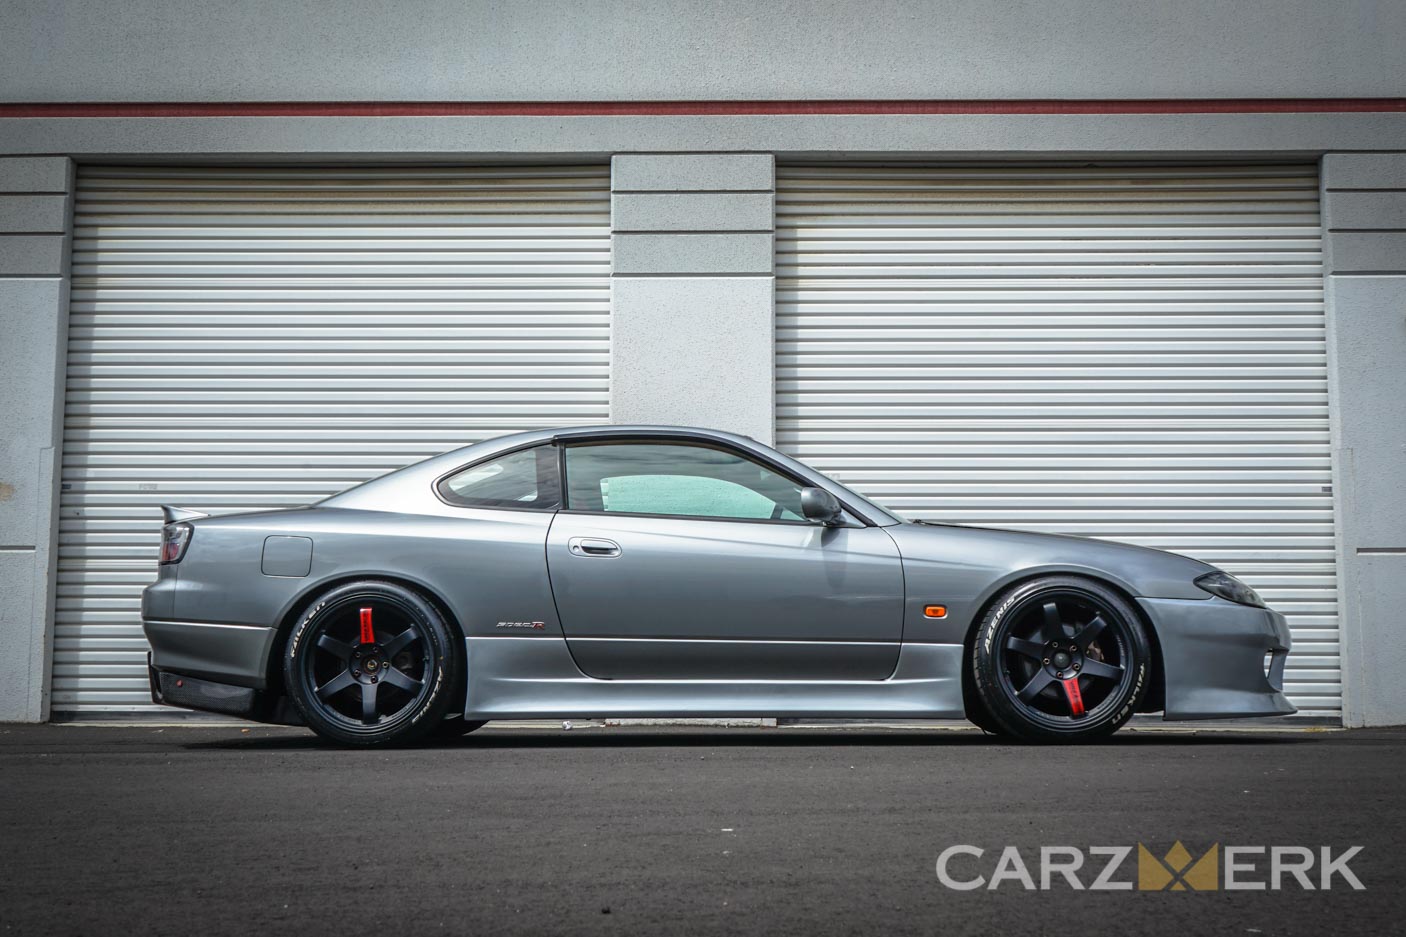 2000 Nissan Silvia S15 - Spec R - Sparking Silver Metallic with Rays TE37 - Side Shot